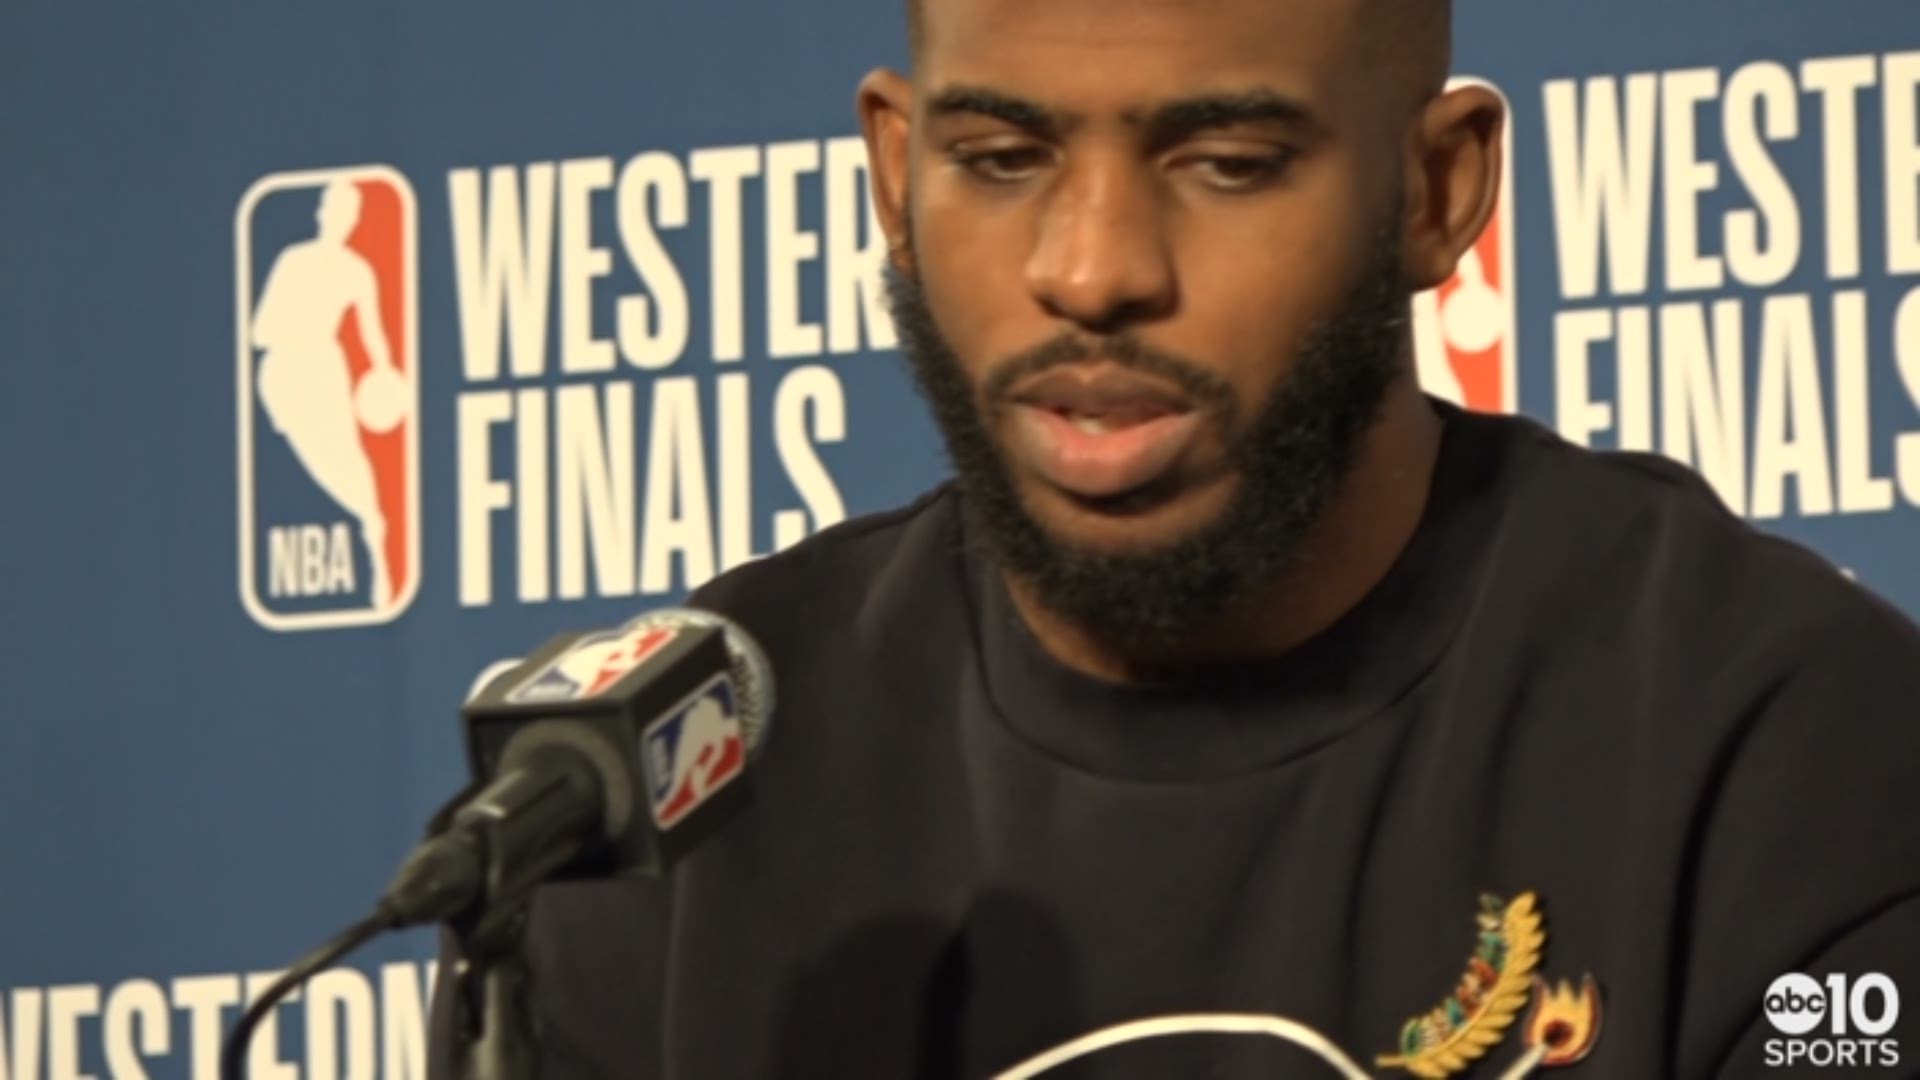 Rockets stars Chris Paul (left) and James Harden (right) discuss Tuesday's win in Game 4 of the Western Conference Finals over the Golden State Warriors, who beat them by 41 points in Game 3. They talk about bouncing back from that loss and taking back th